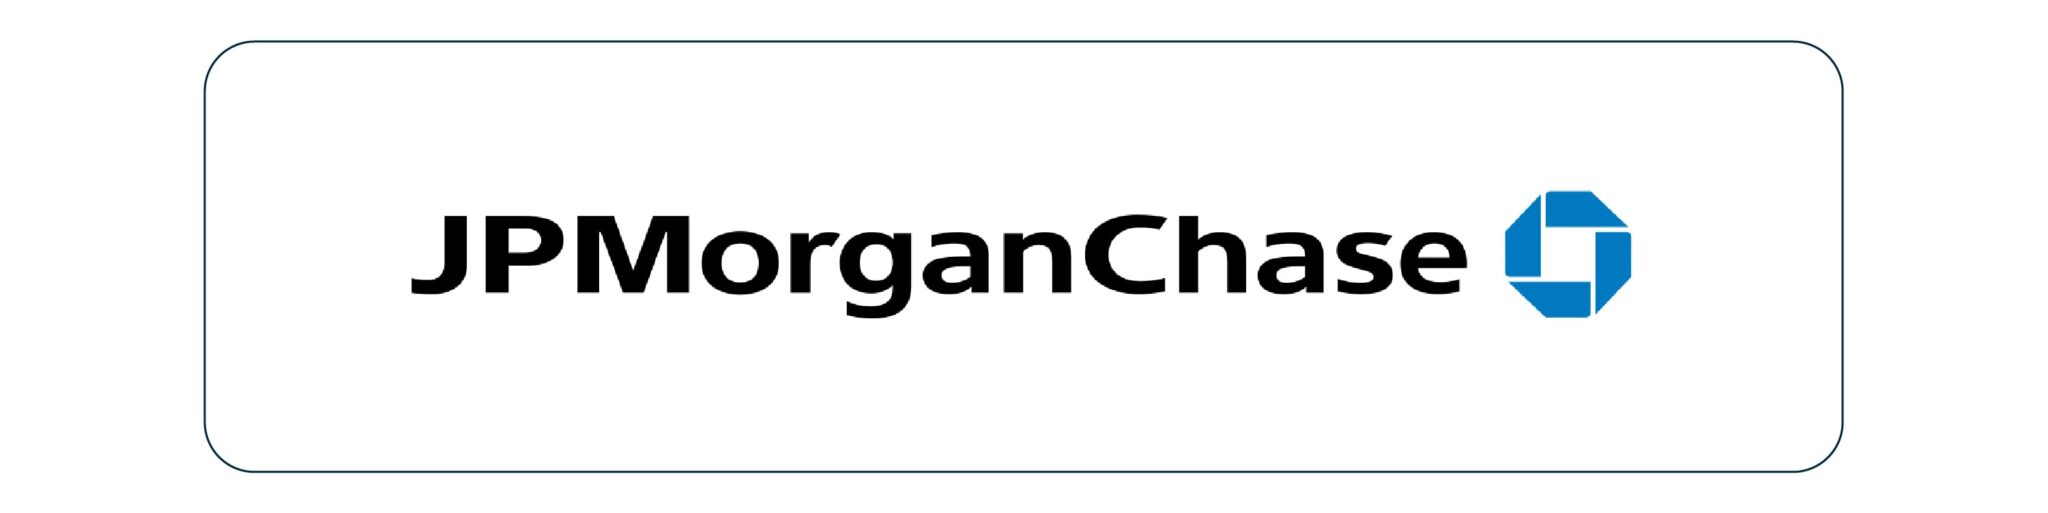 JPMorgan Chase as one of the success stories of Digital Transformation in Banking